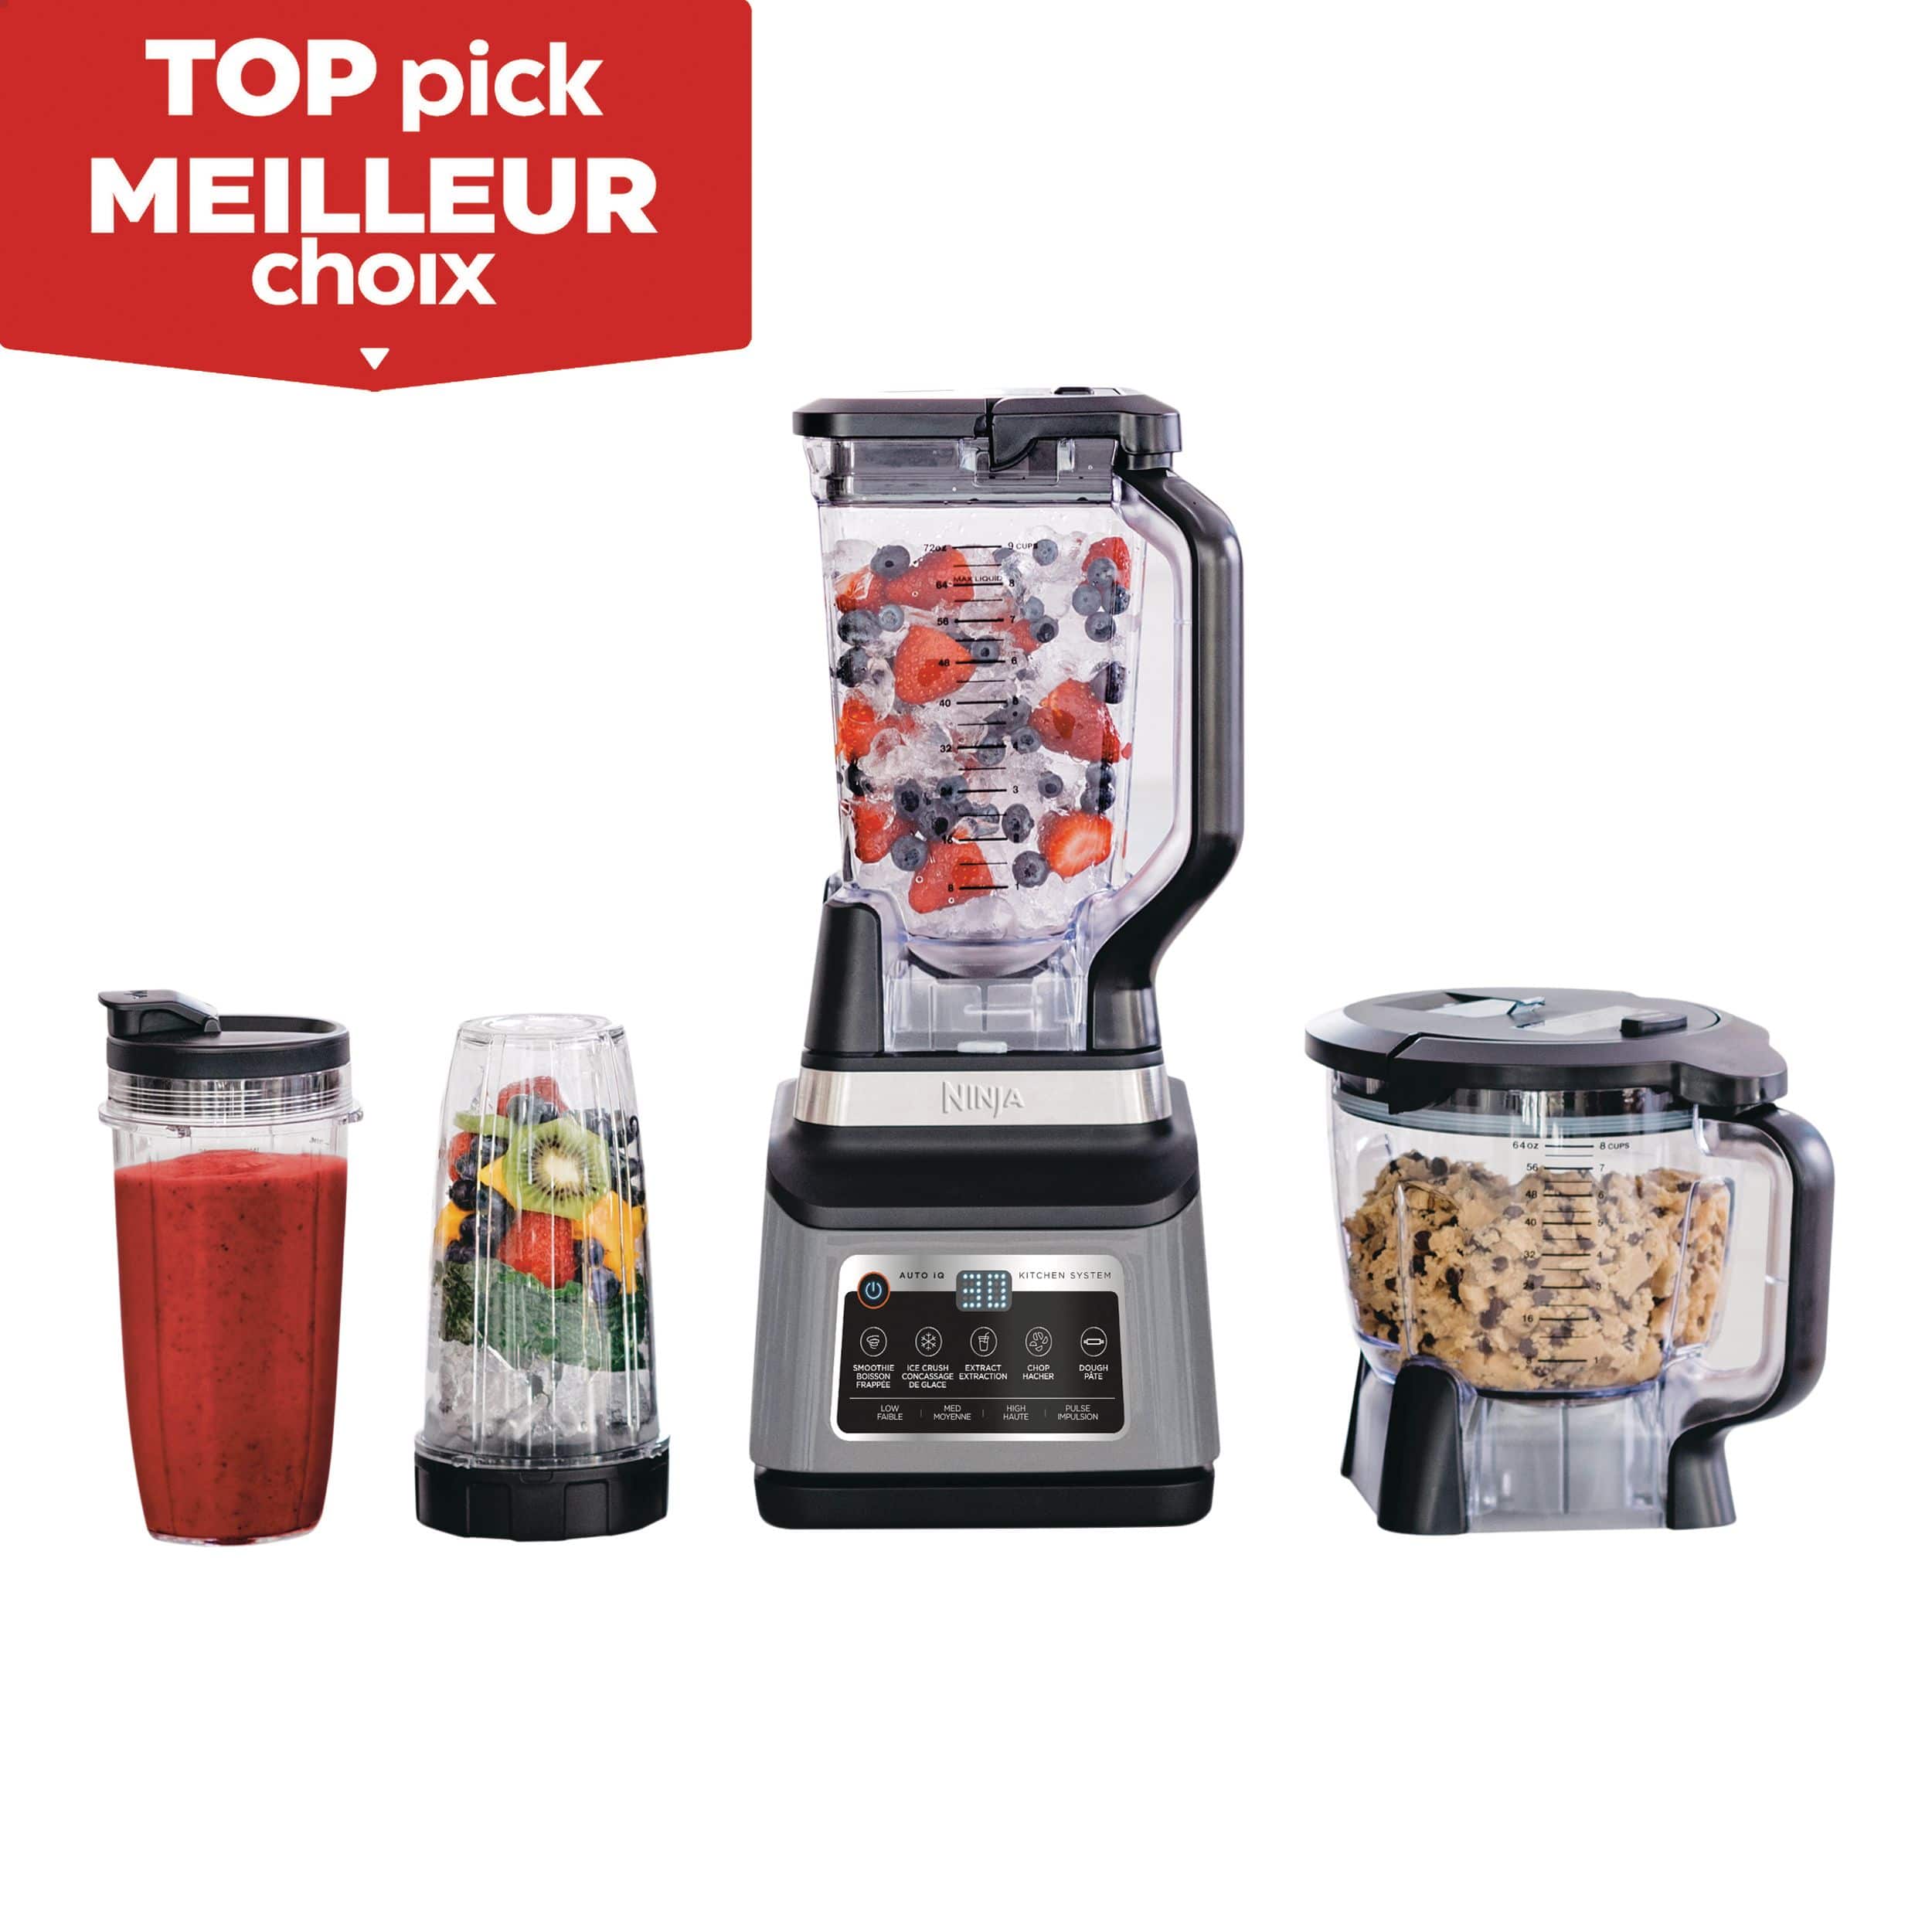 https://media-www.canadiantire.ca/product/living/kitchen/kitchen-appliances/0430731/ninja-professional-plus-kitchen-system-with-auto-iq-685bf4ce-3fe6-4472-aa63-a4e3b0f9cf3c-jpgrendition.jpg